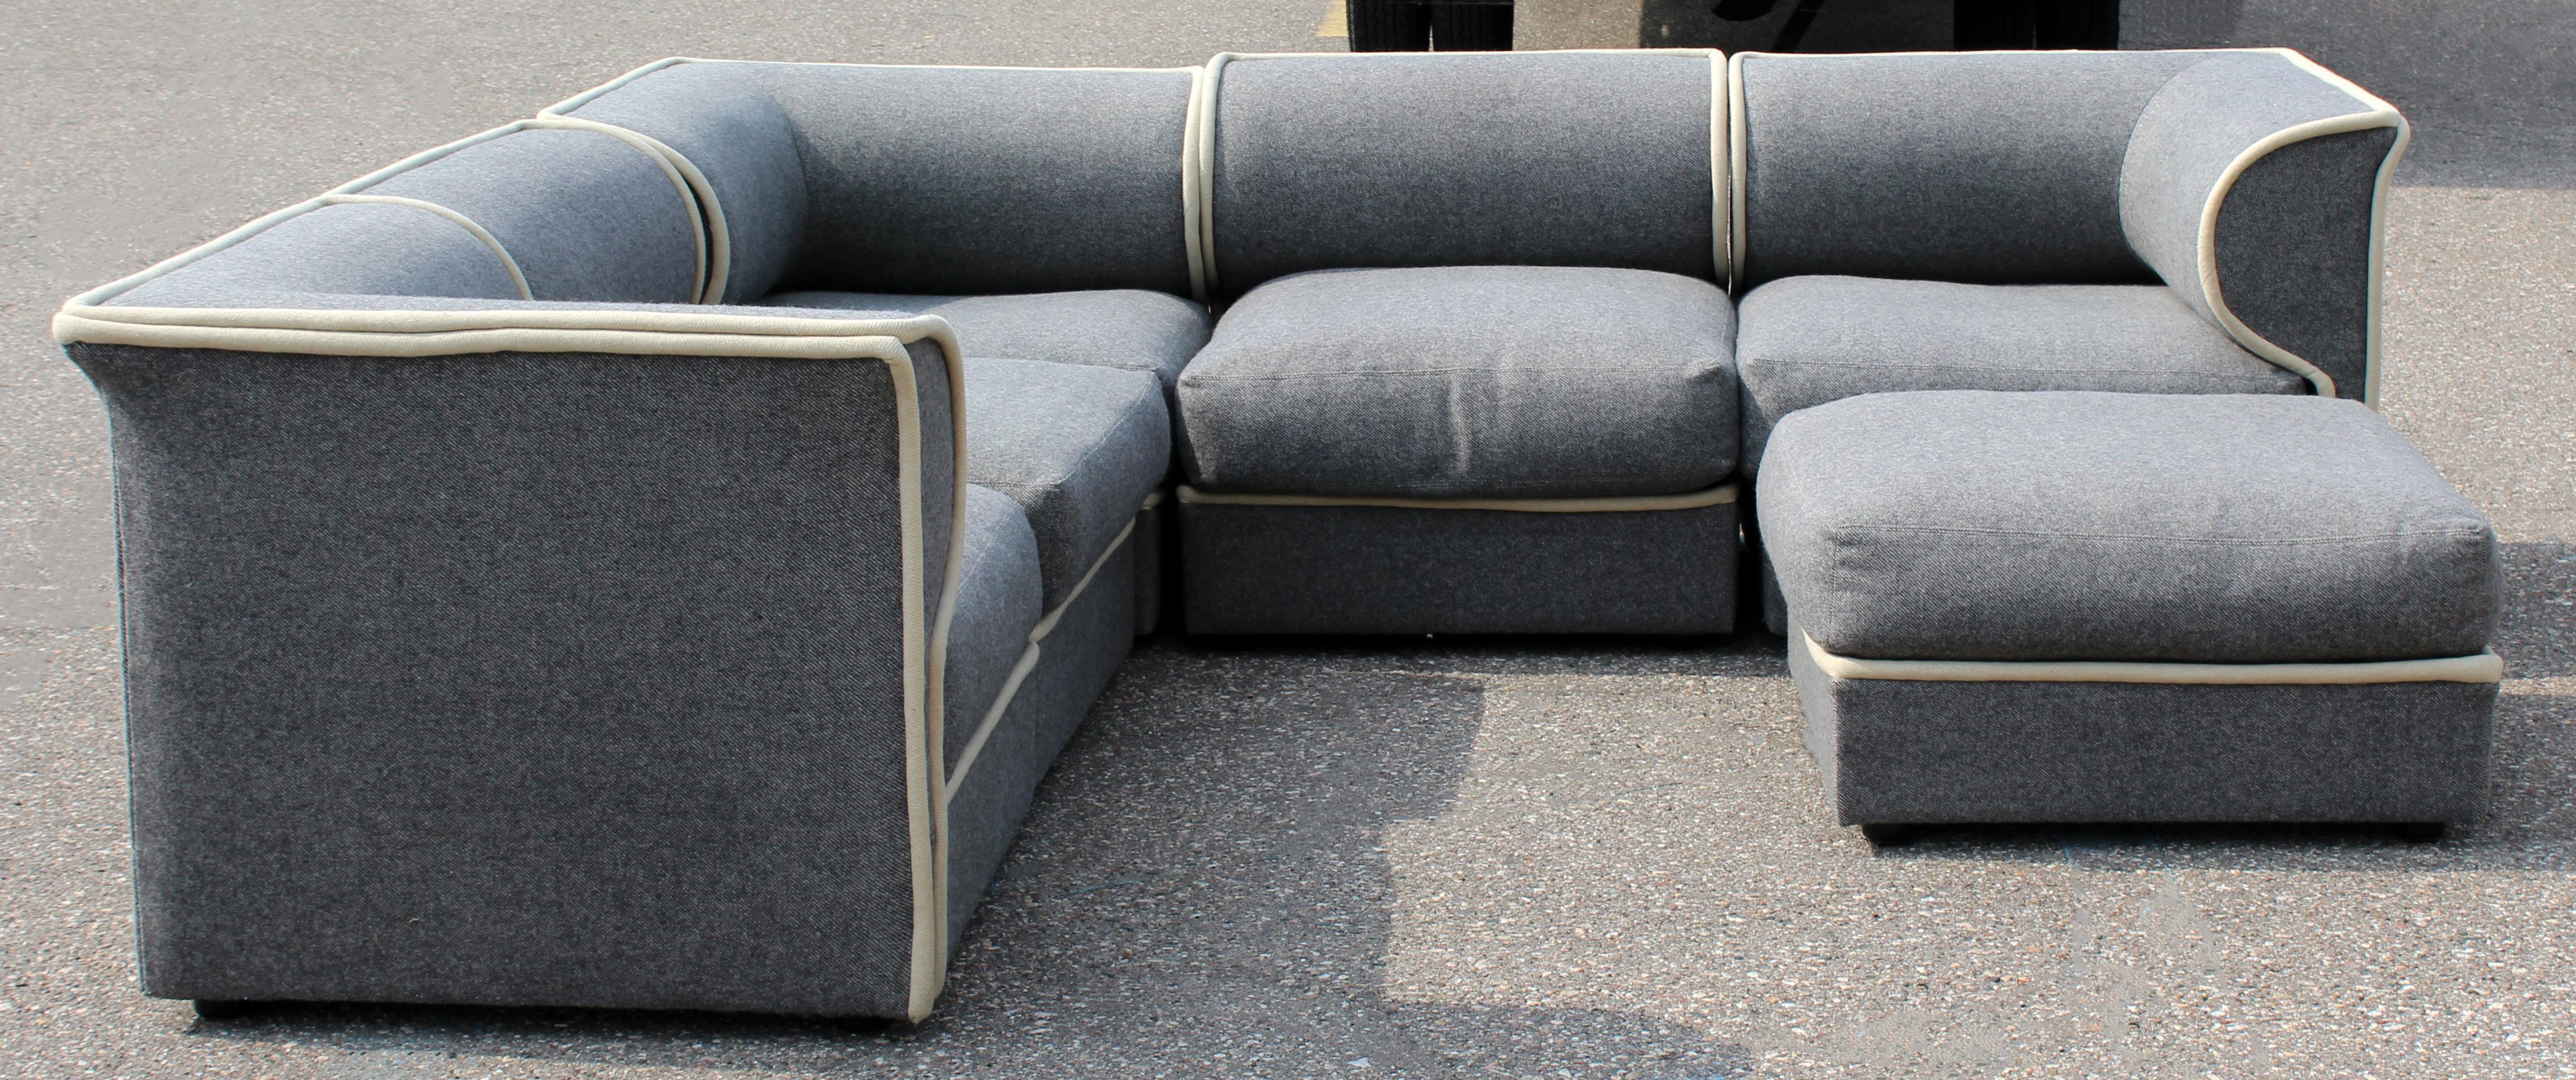 For your consideration is a phenomenal, five-piece, curved, modular sectional sofa in a dove gray wool blend upholstery, by Directional, circa 1990s. In excellent condition. The dimensions of each piece are 31.5